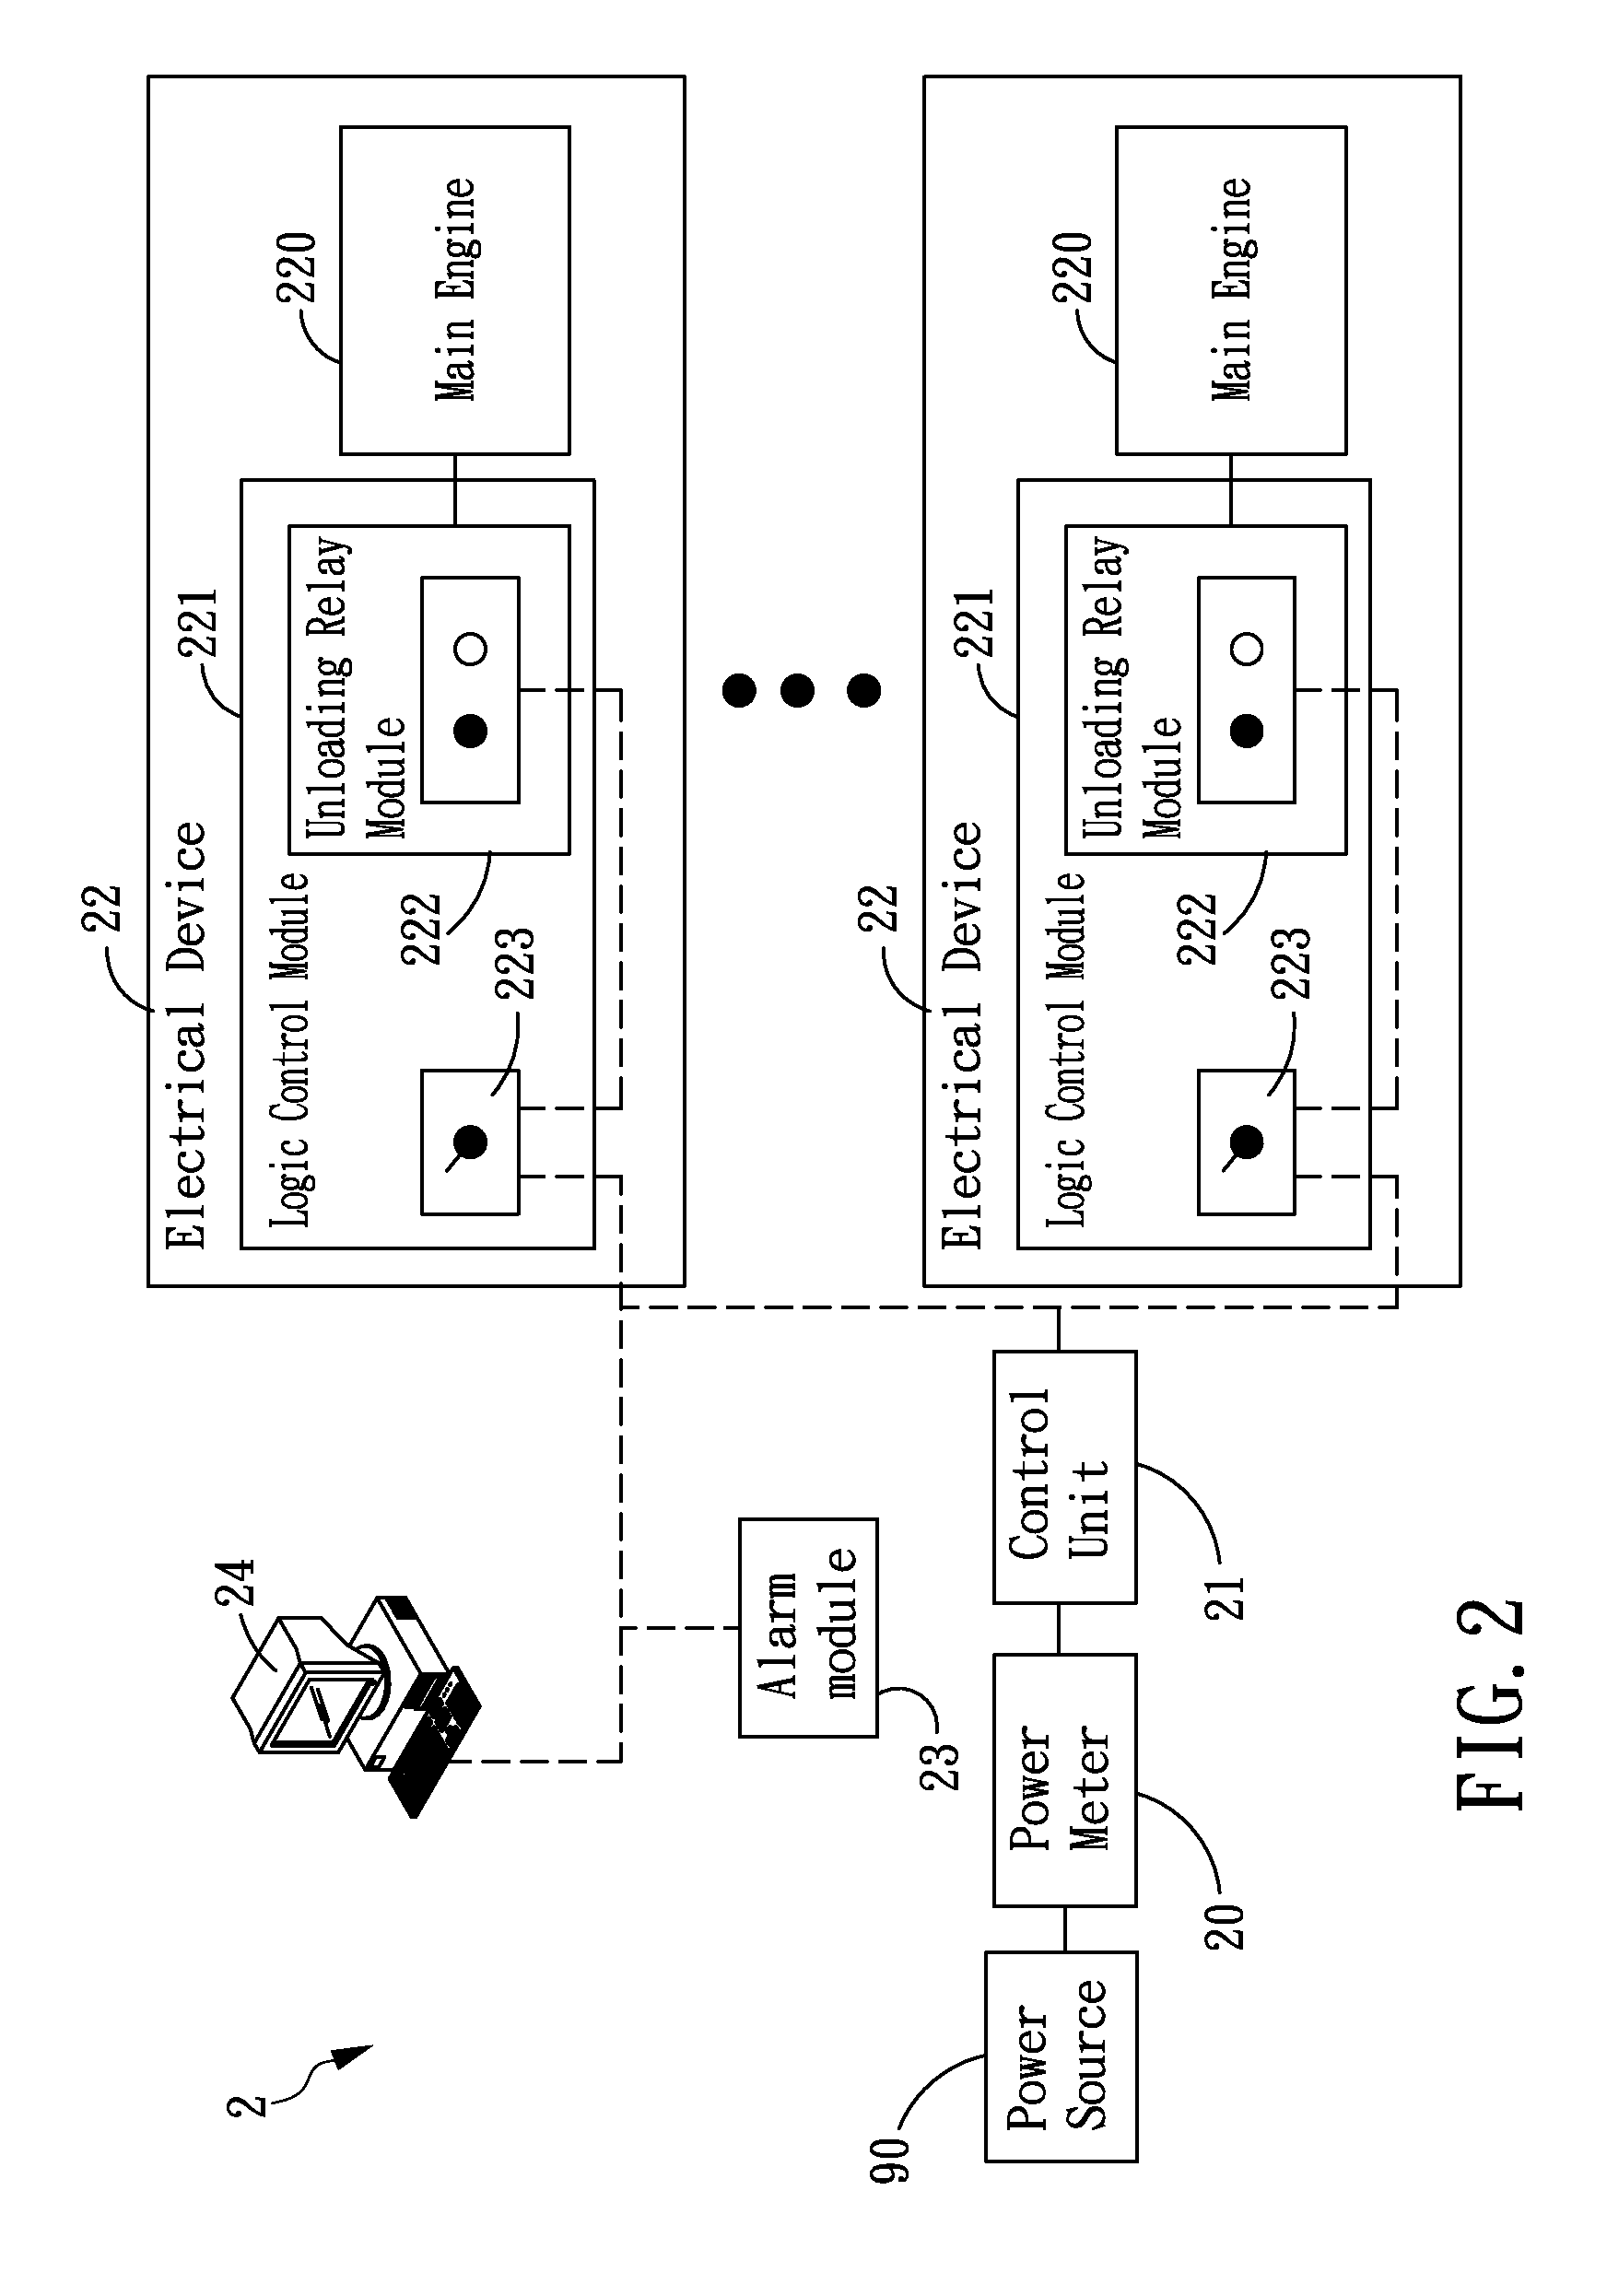 Method and system for power load management